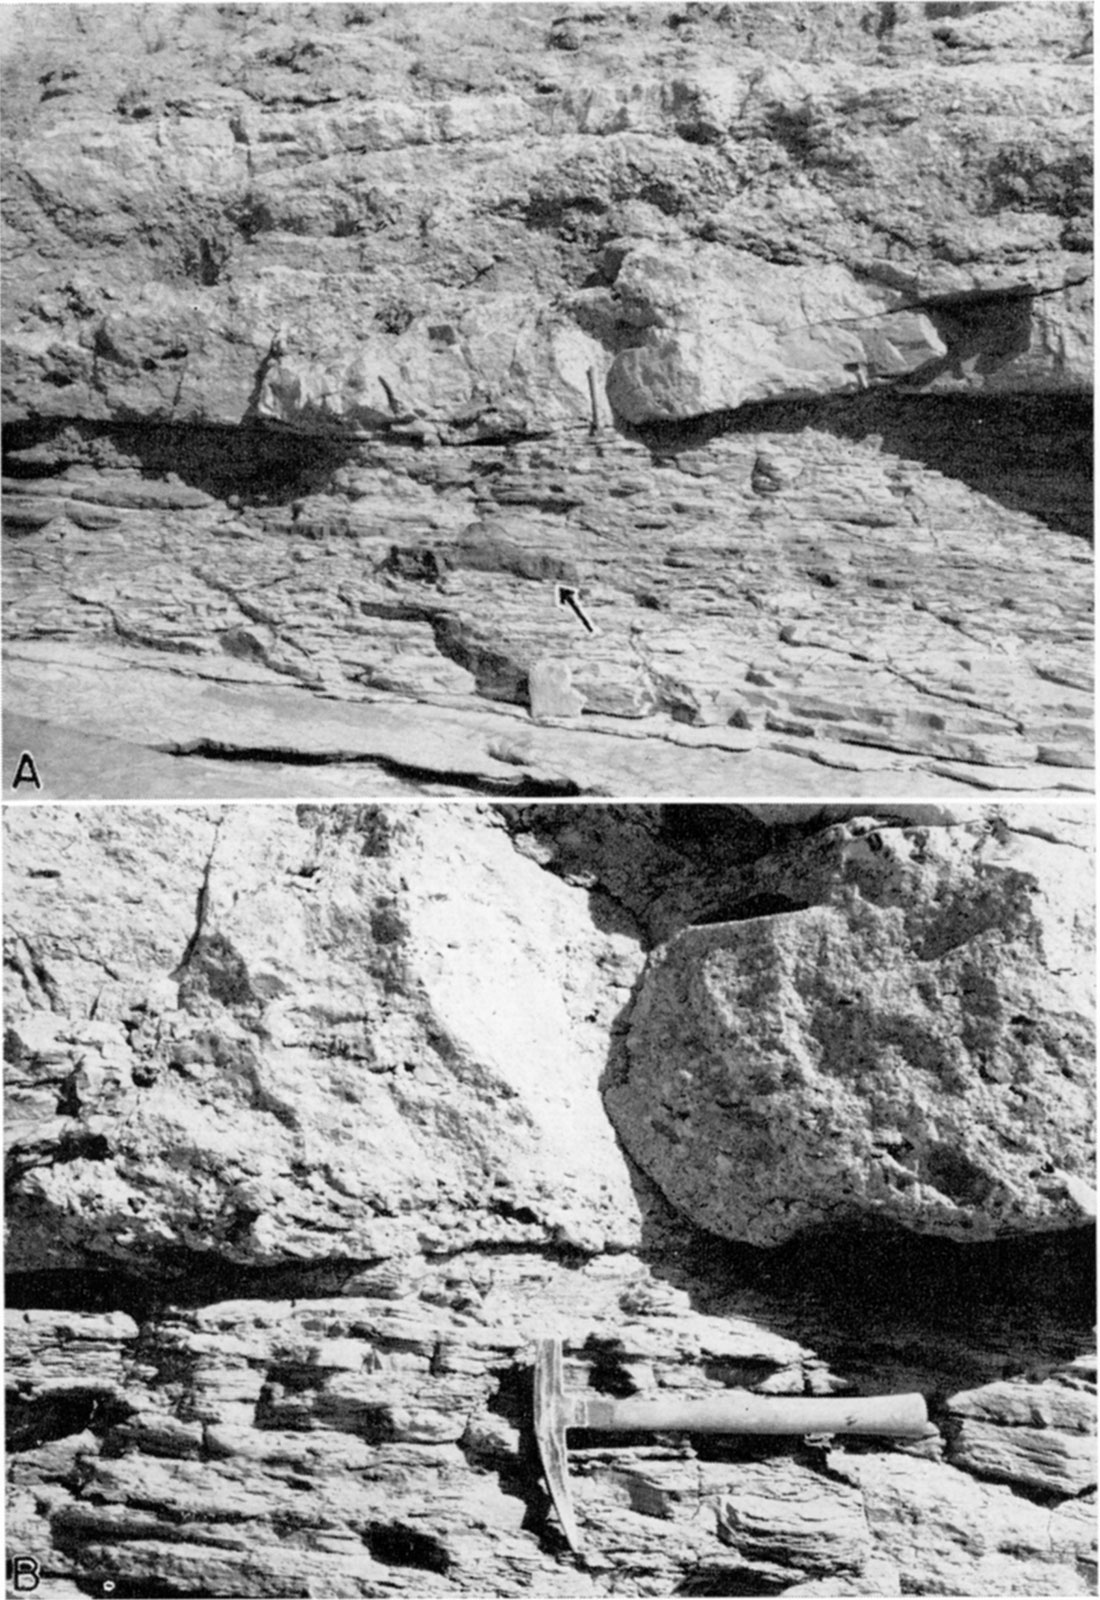 Two black and white photos; top is sharp contact between the Cockrum and Ogallala; bottom is close-up view of the contact, showing the conglomeratic nature of the material at the base of the Ogallala.